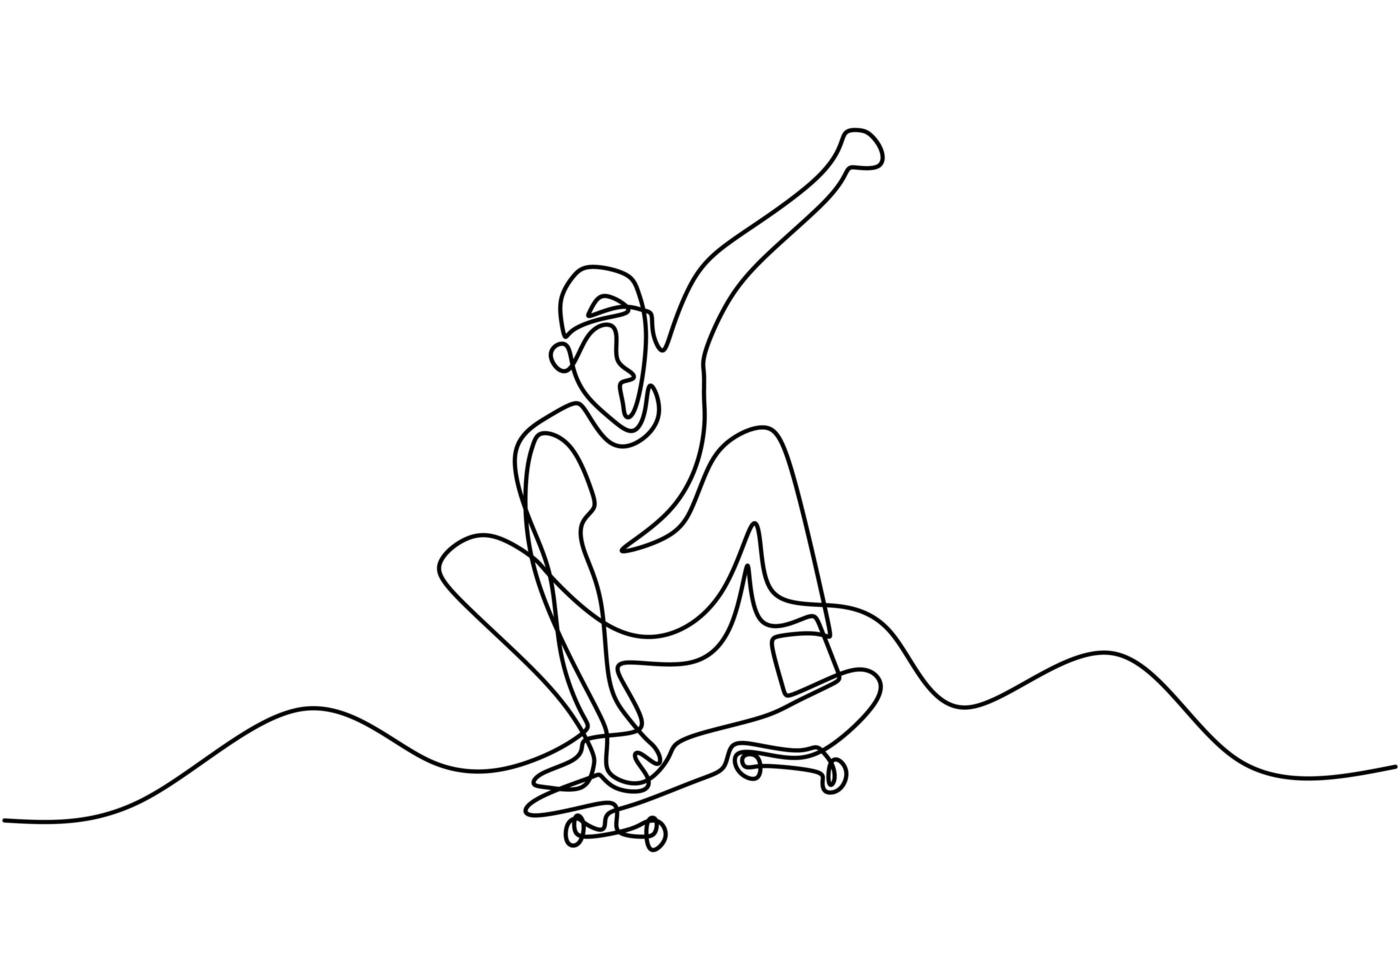 One single continuous line drawing of skateboard player. Young skateboarder man exercise riding skateboard at ramp board vector illustration. Extreme sport vector illustration theme